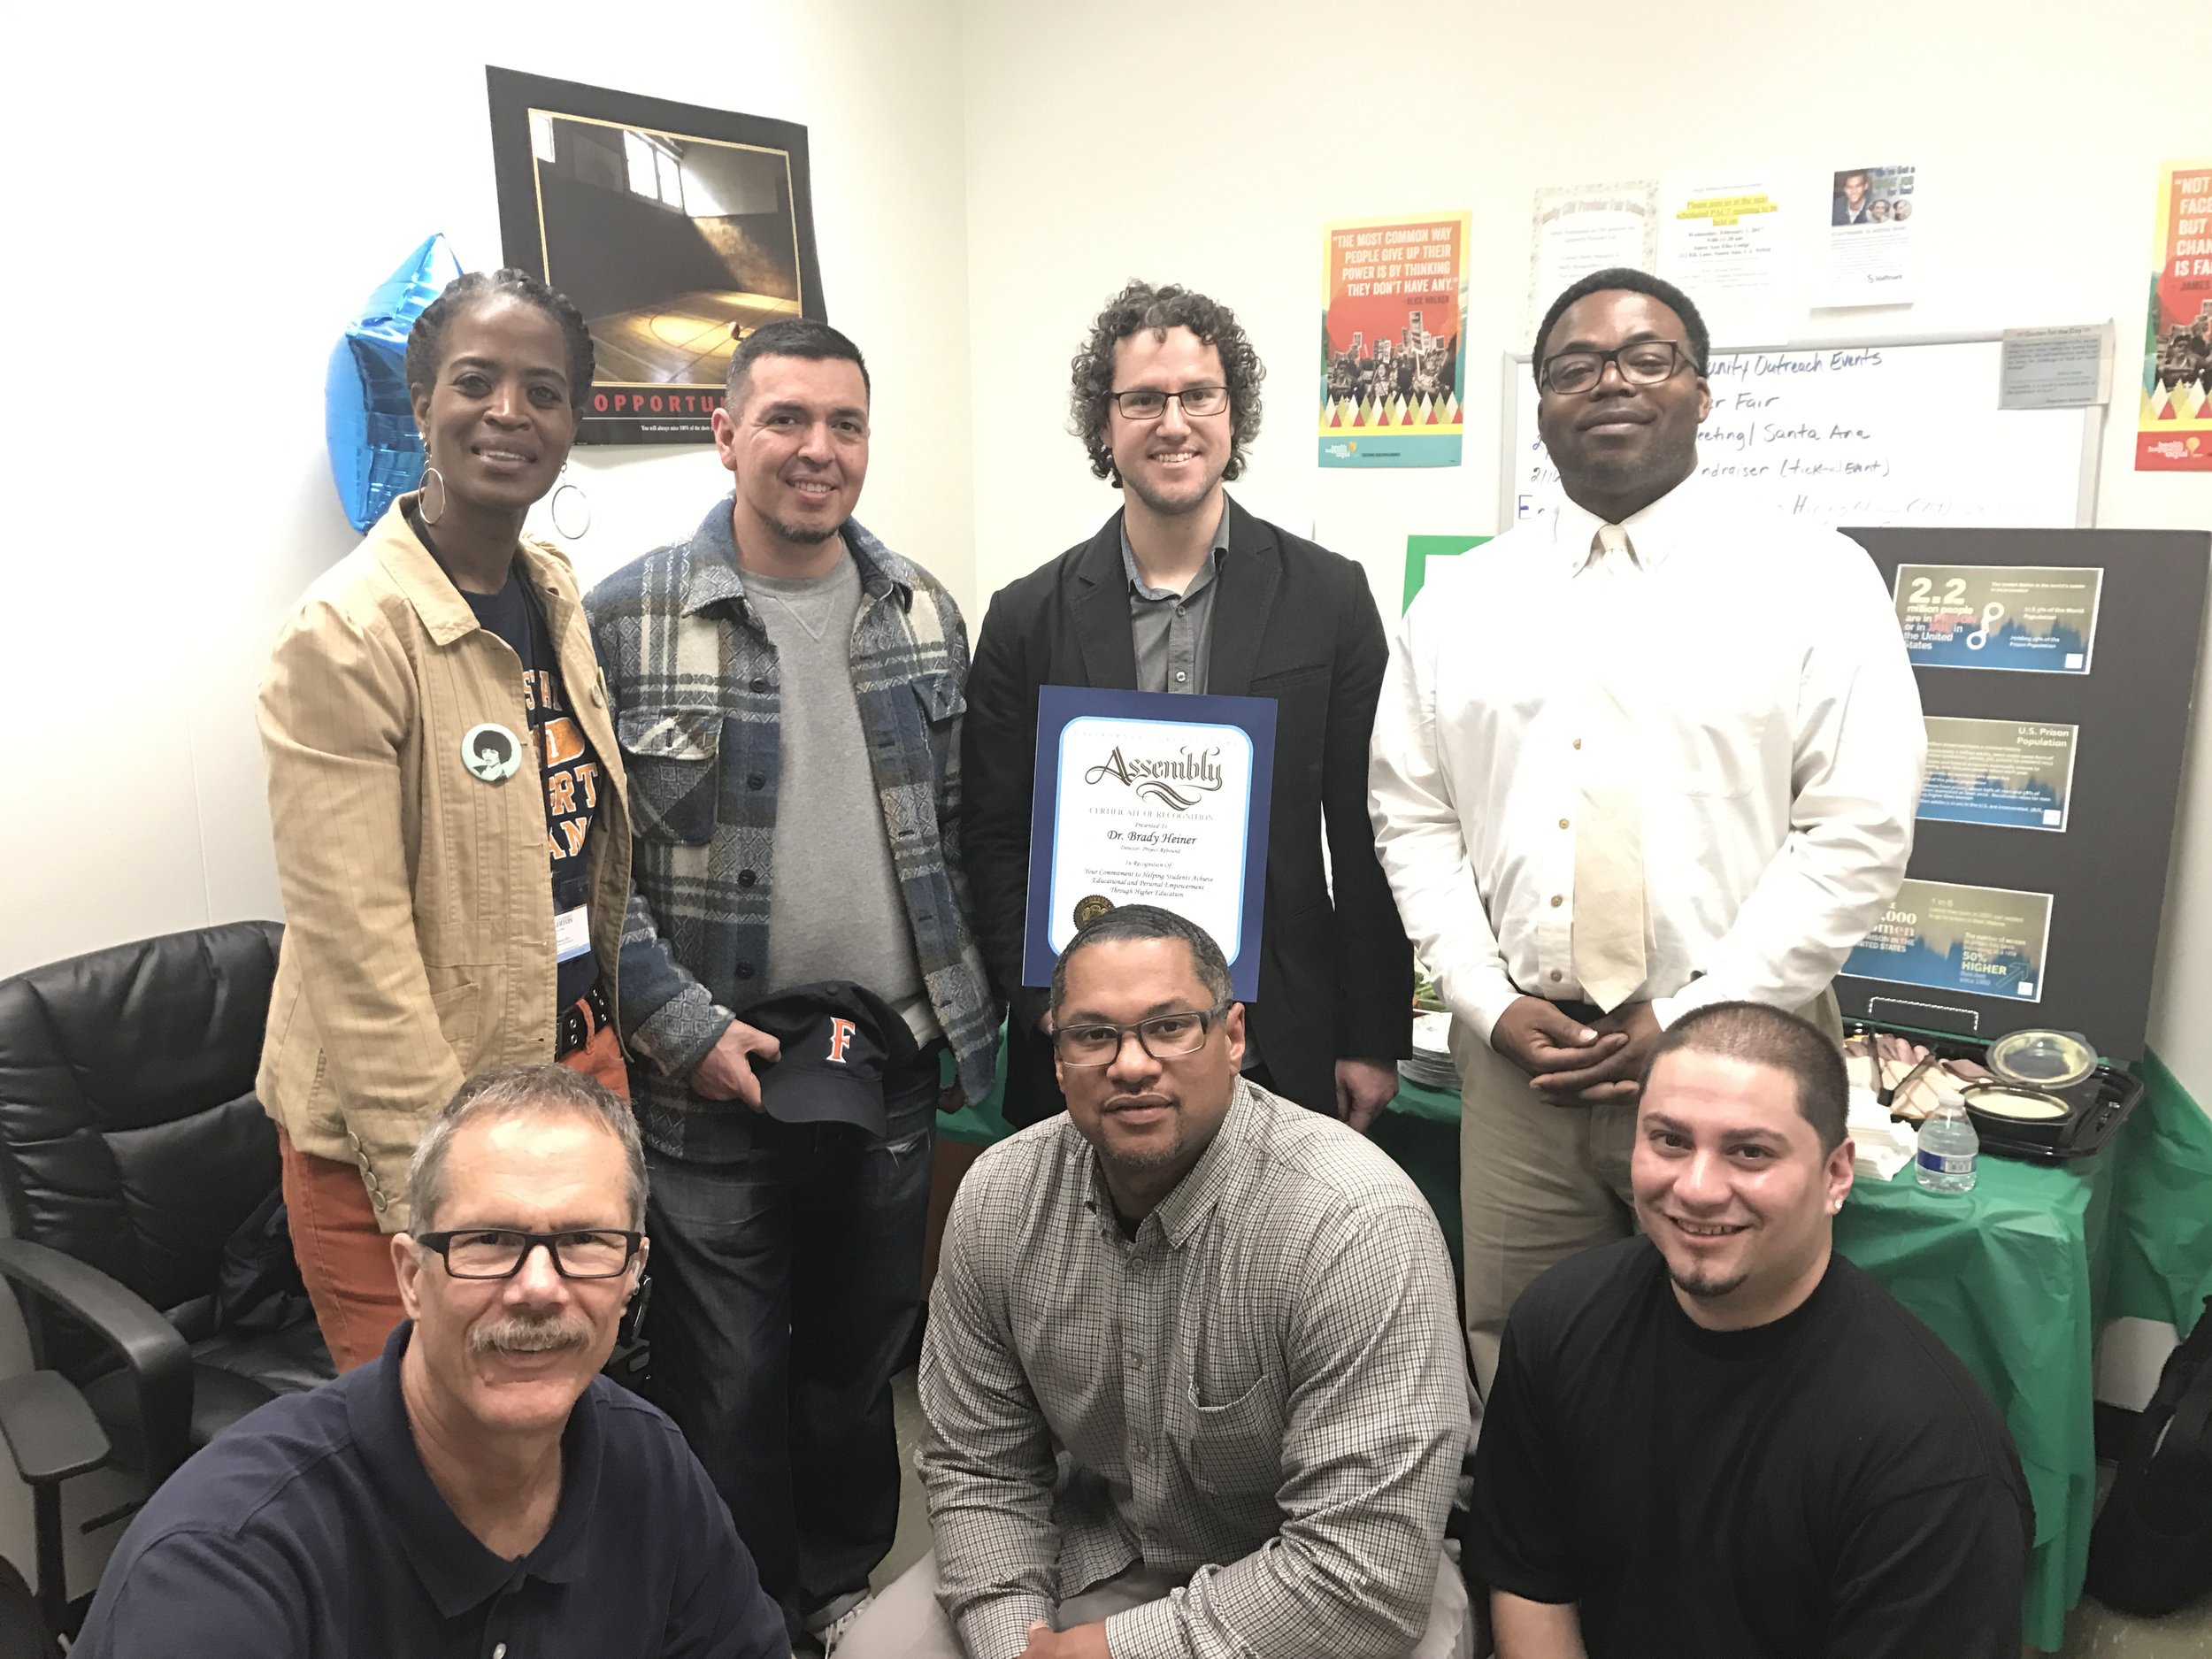  Project Rebound Director, Dr. Brady Heiner receives California Legislature recognition for his work with formerly incarcerated students at Cal State University, Fullerton. 